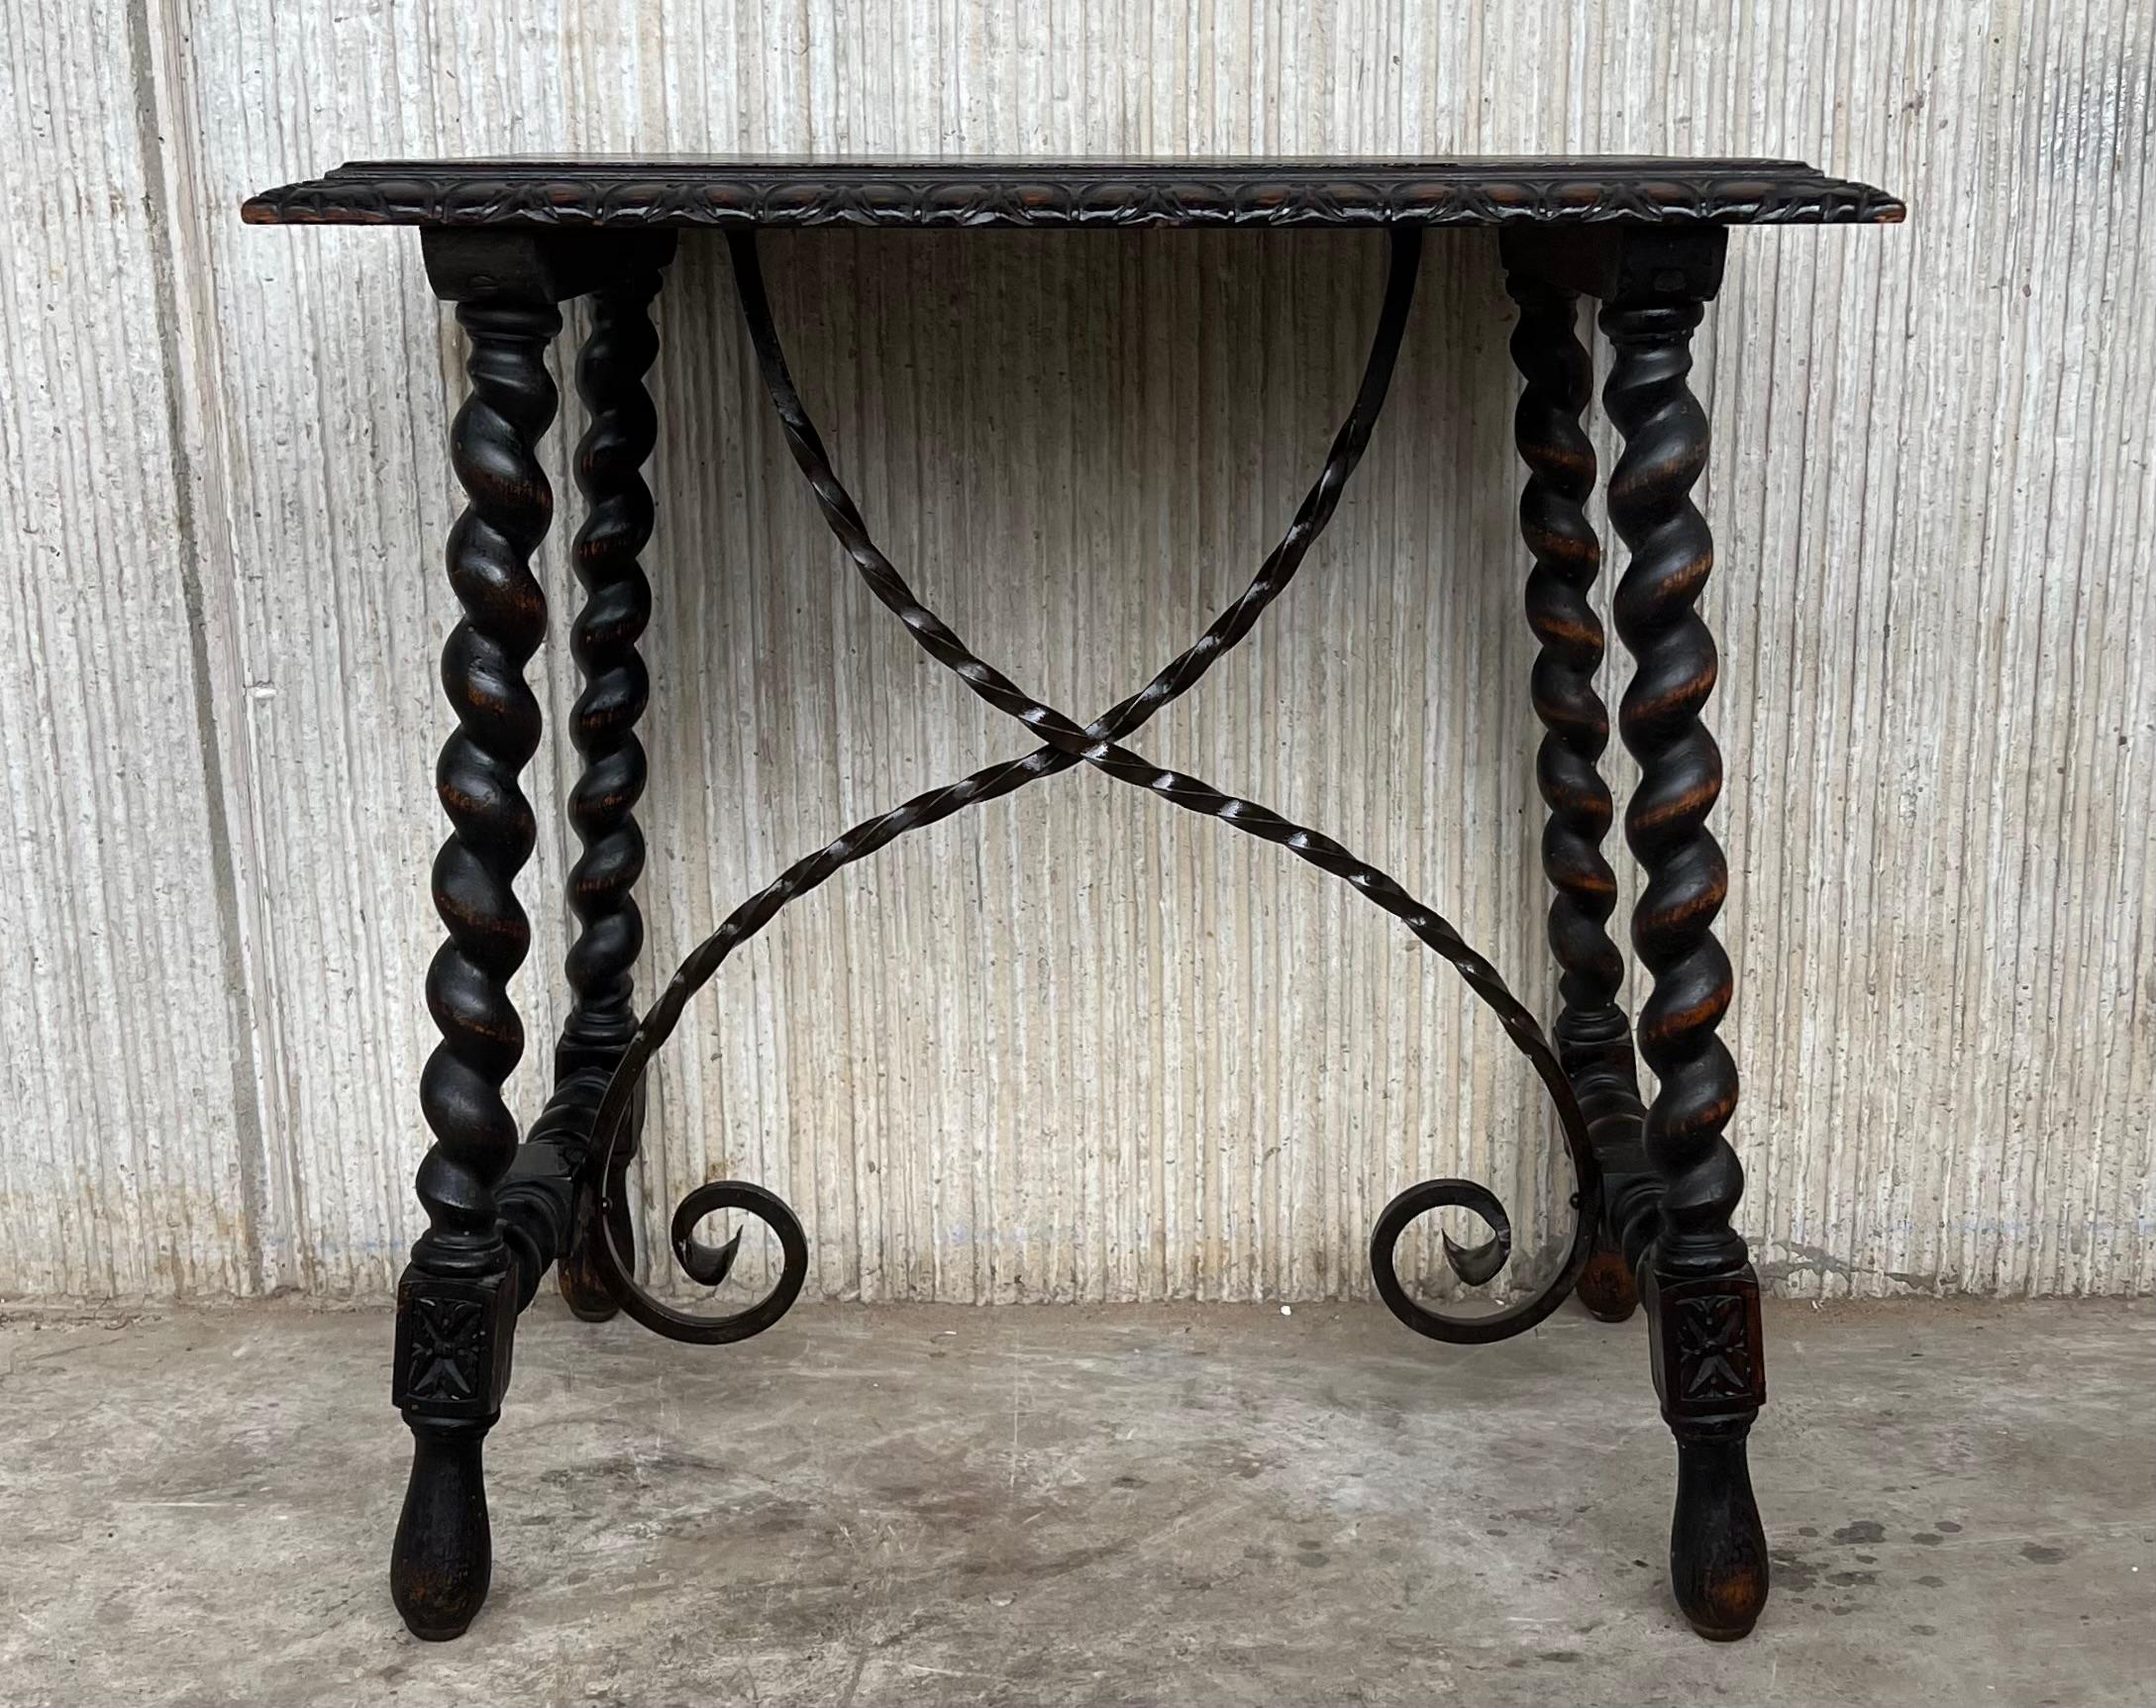 19th Century Spanish side table with beautiful and rare iron stretcher. The rectangular top has carved edges, the end legs has a beautiful Solomonic carved.
The measure is very rare because you can use like a side table, end table, sofa table or